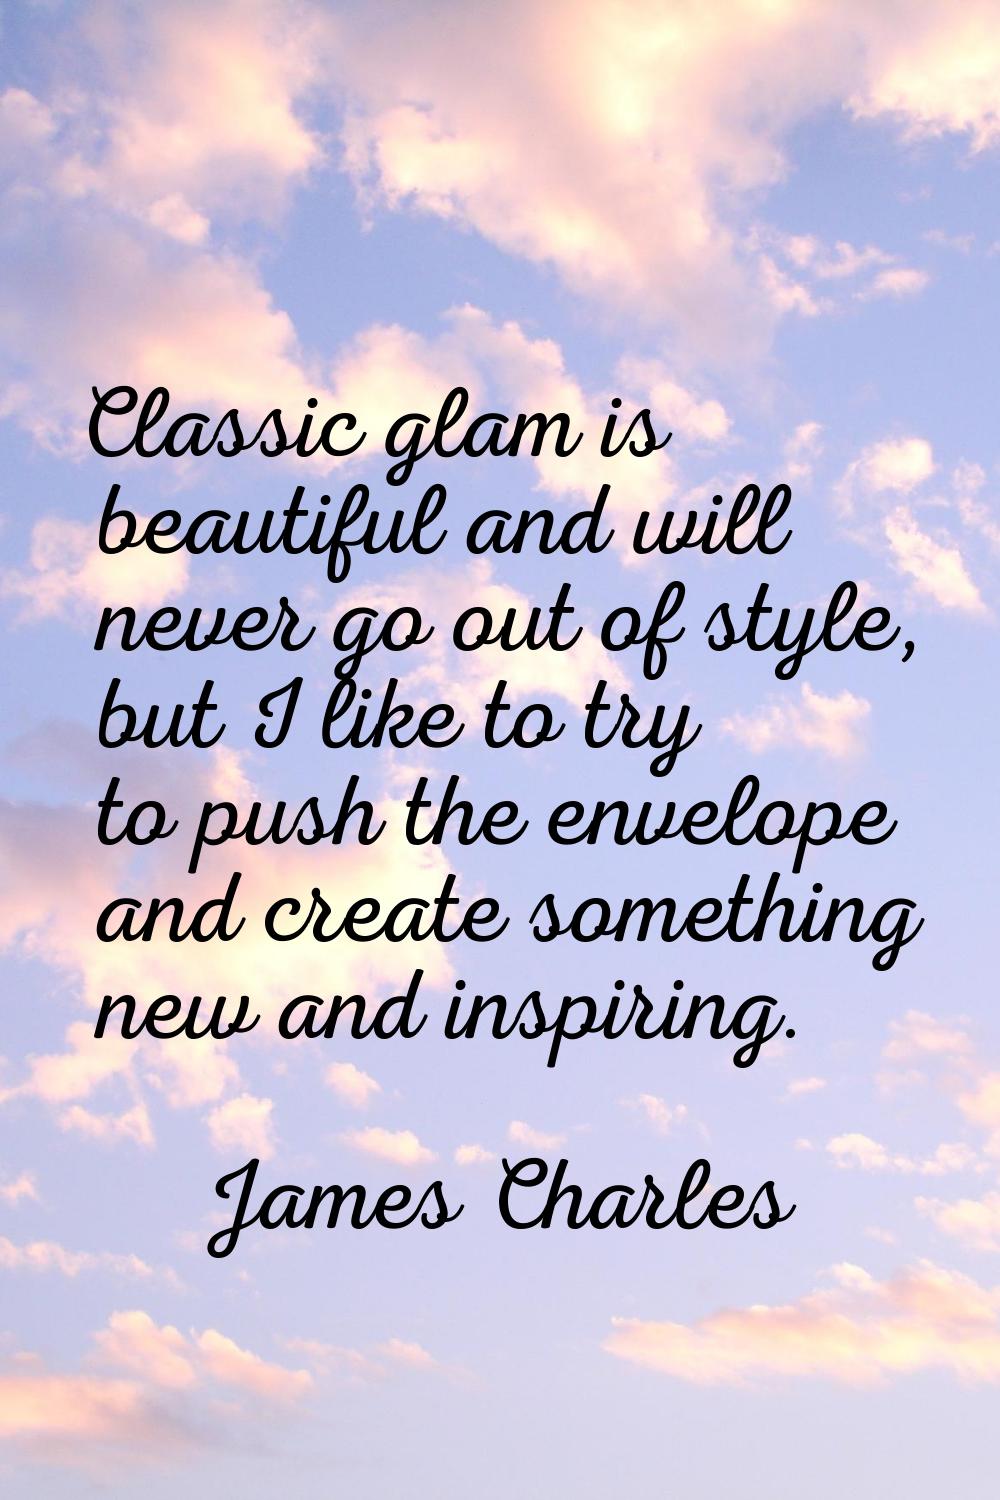 Classic glam is beautiful and will never go out of style, but I like to try to push the envelope an